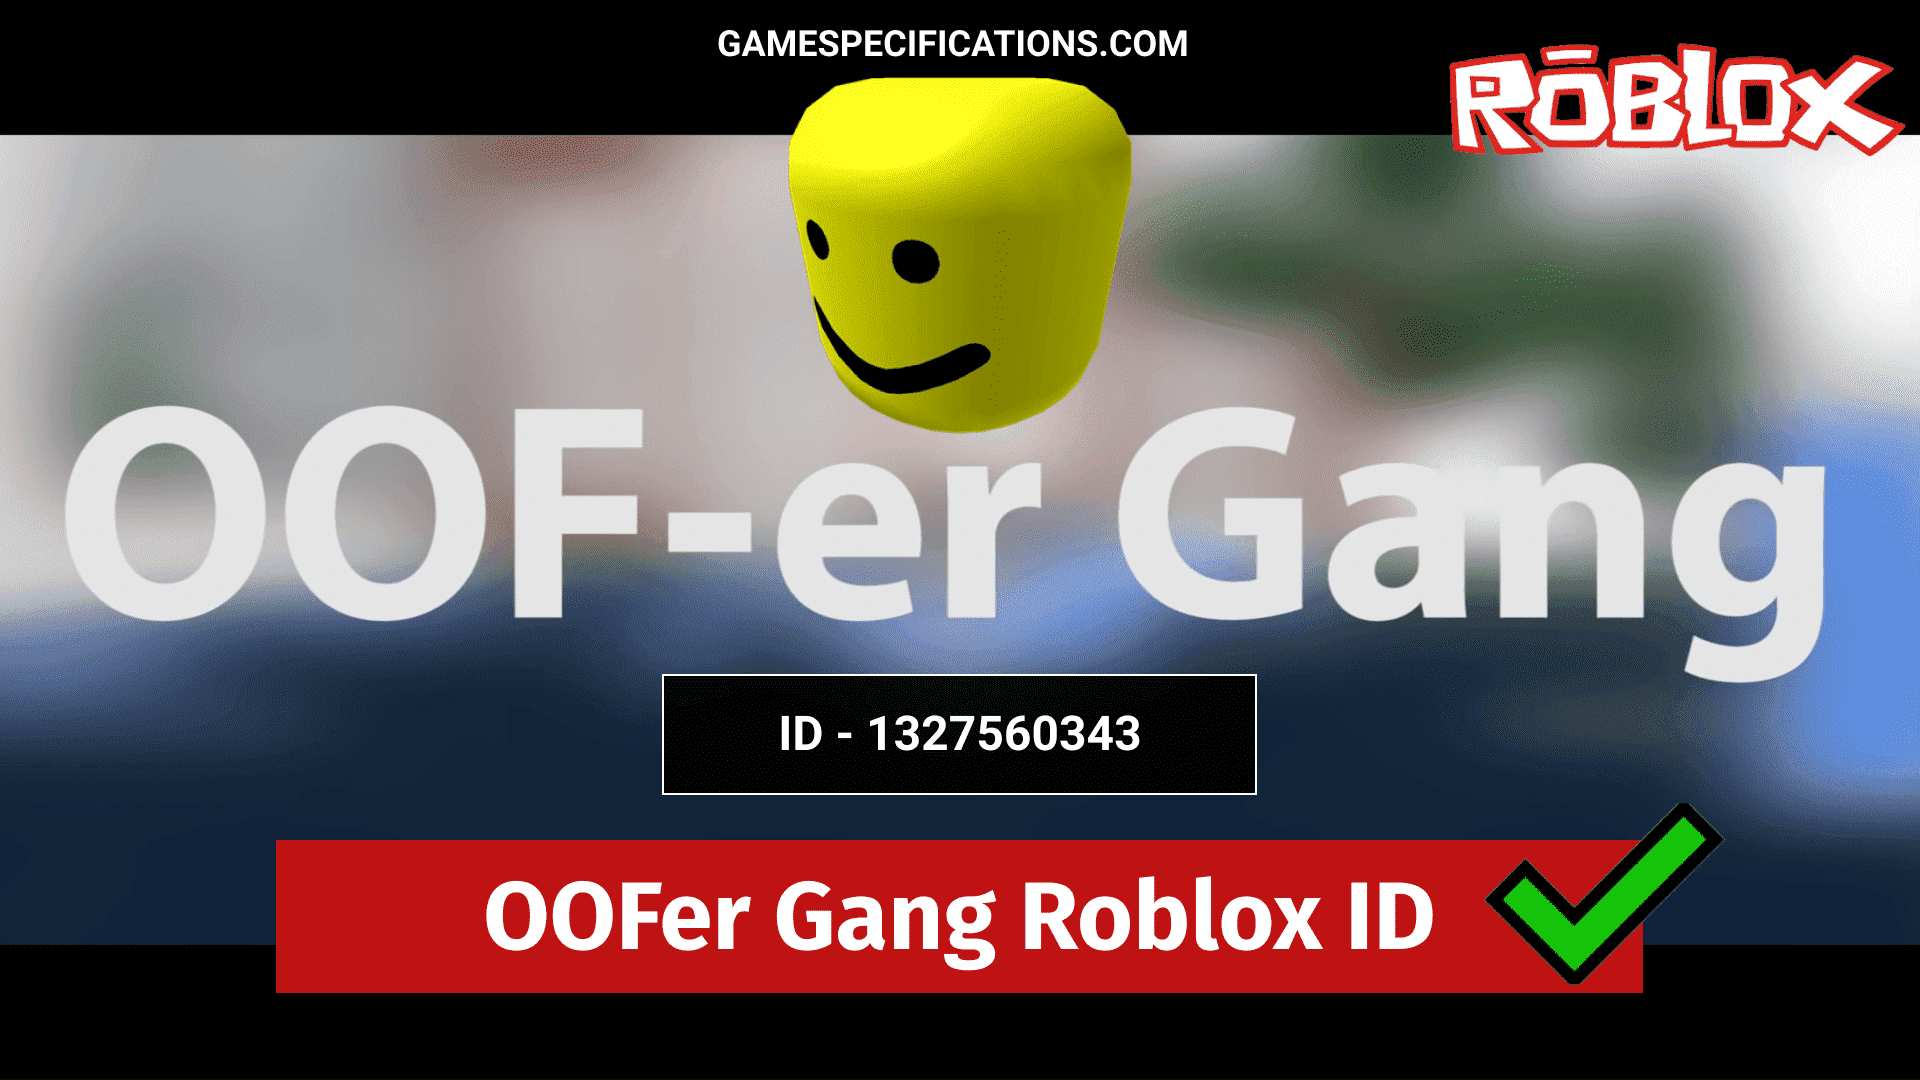 Oofer Gang Roblox Id Codes 2021 Game Specifications - lil pump roblox id song codes